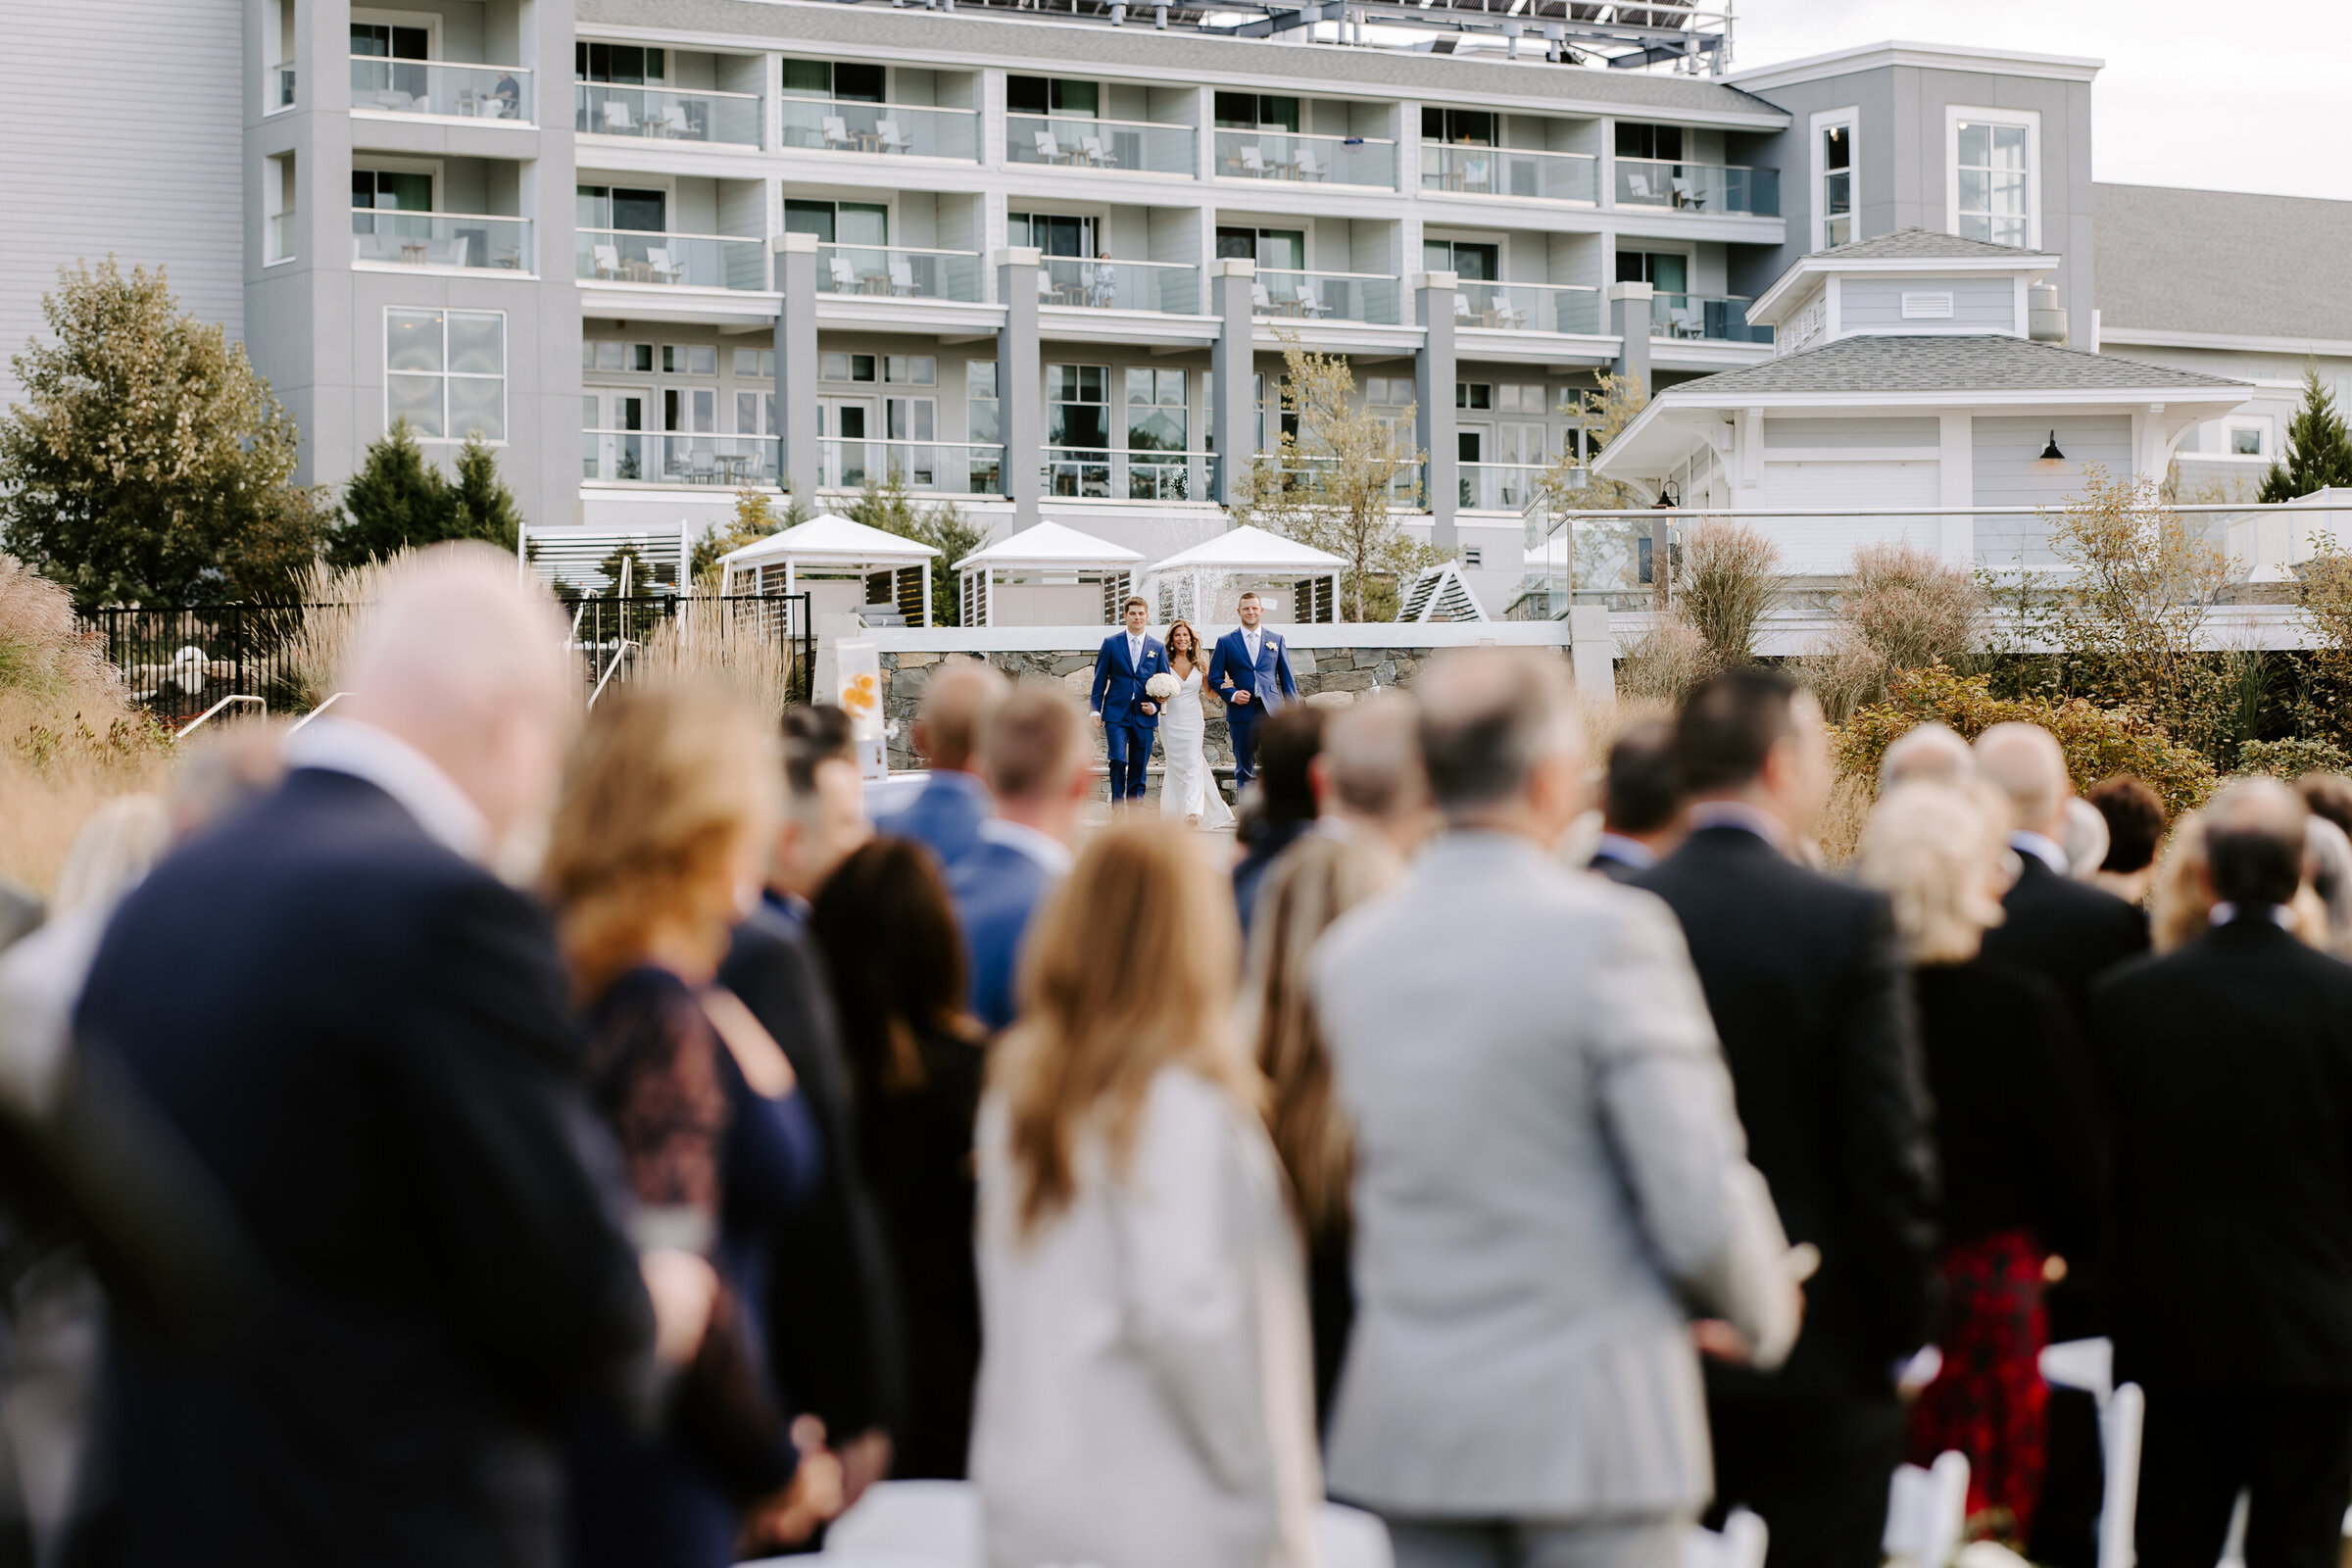 Guests turn and look at bride as her sons walk her down the aisle at The Cliffhouse in maine